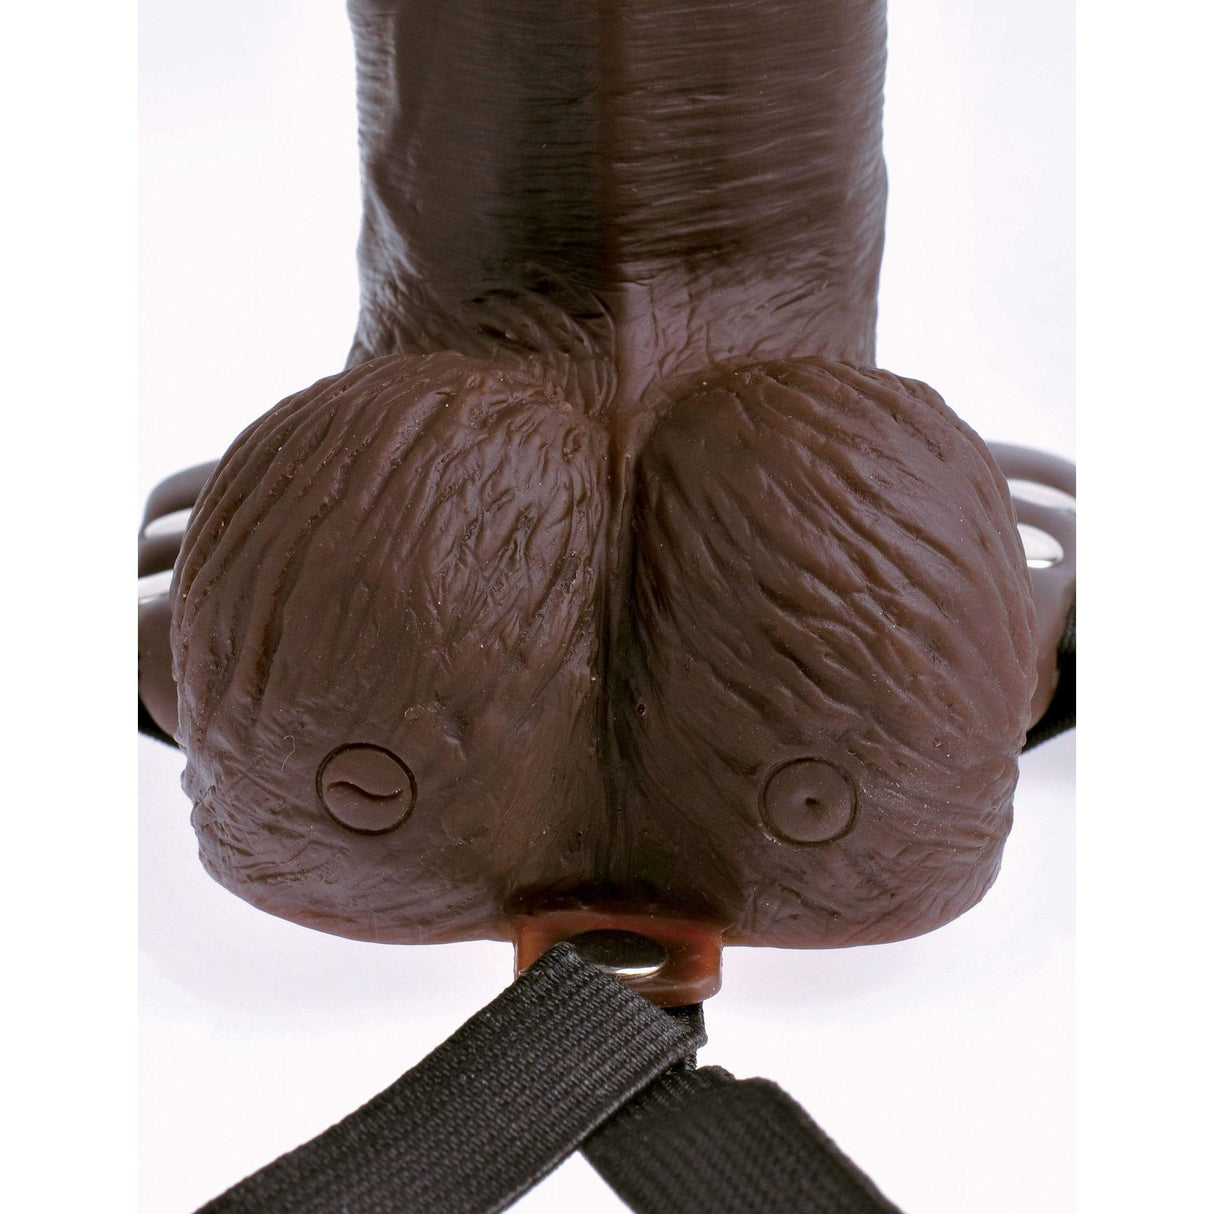 Pipedream - Fetish Fantasy Hollow Rechargeable Strap-On Remote 8" (Brown) PD1790 CherryAffairs